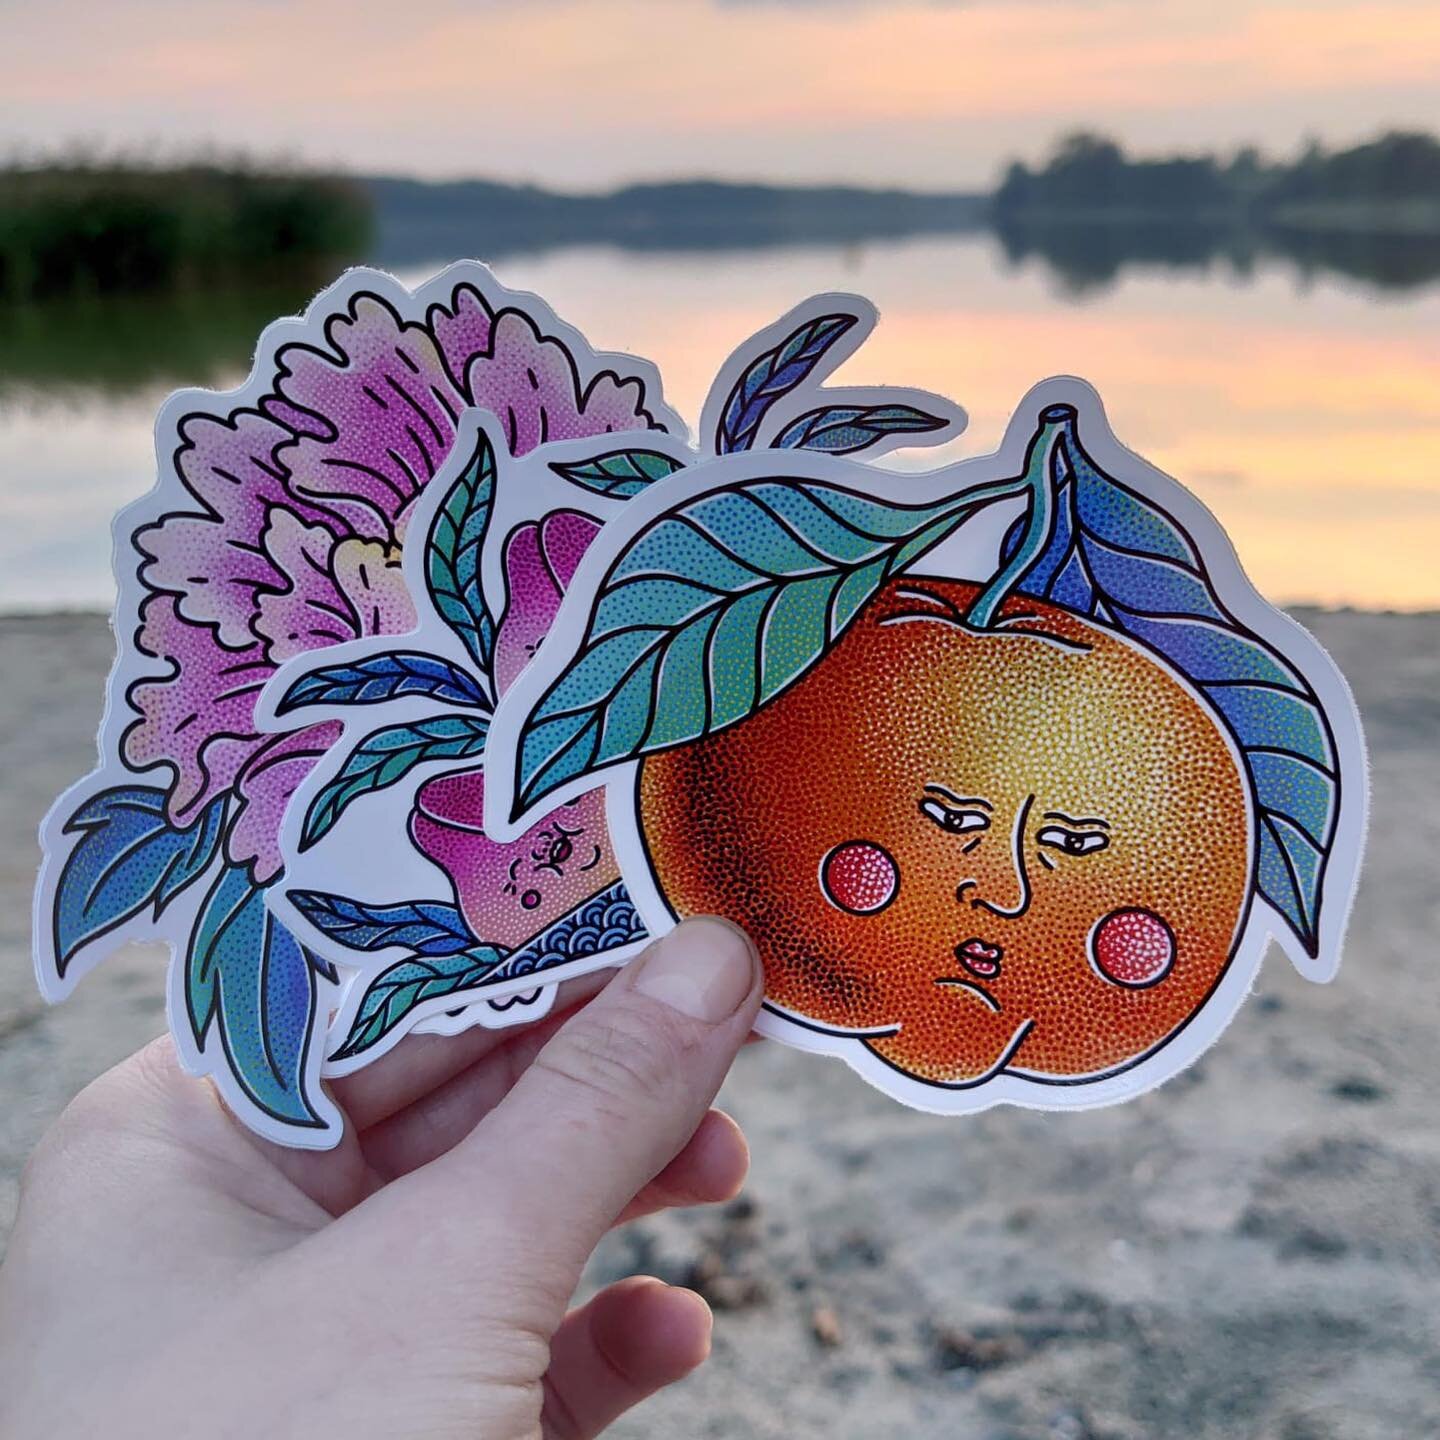 Came across some photos of my stickers from a trip to my parents last year. Excuse my foraging hands, it was a mushroom picking season 💅🍄

Someone told me my flower sticker looks like Trump and I can&rsquo;t unsee it 😱

#illustration #stickerart #